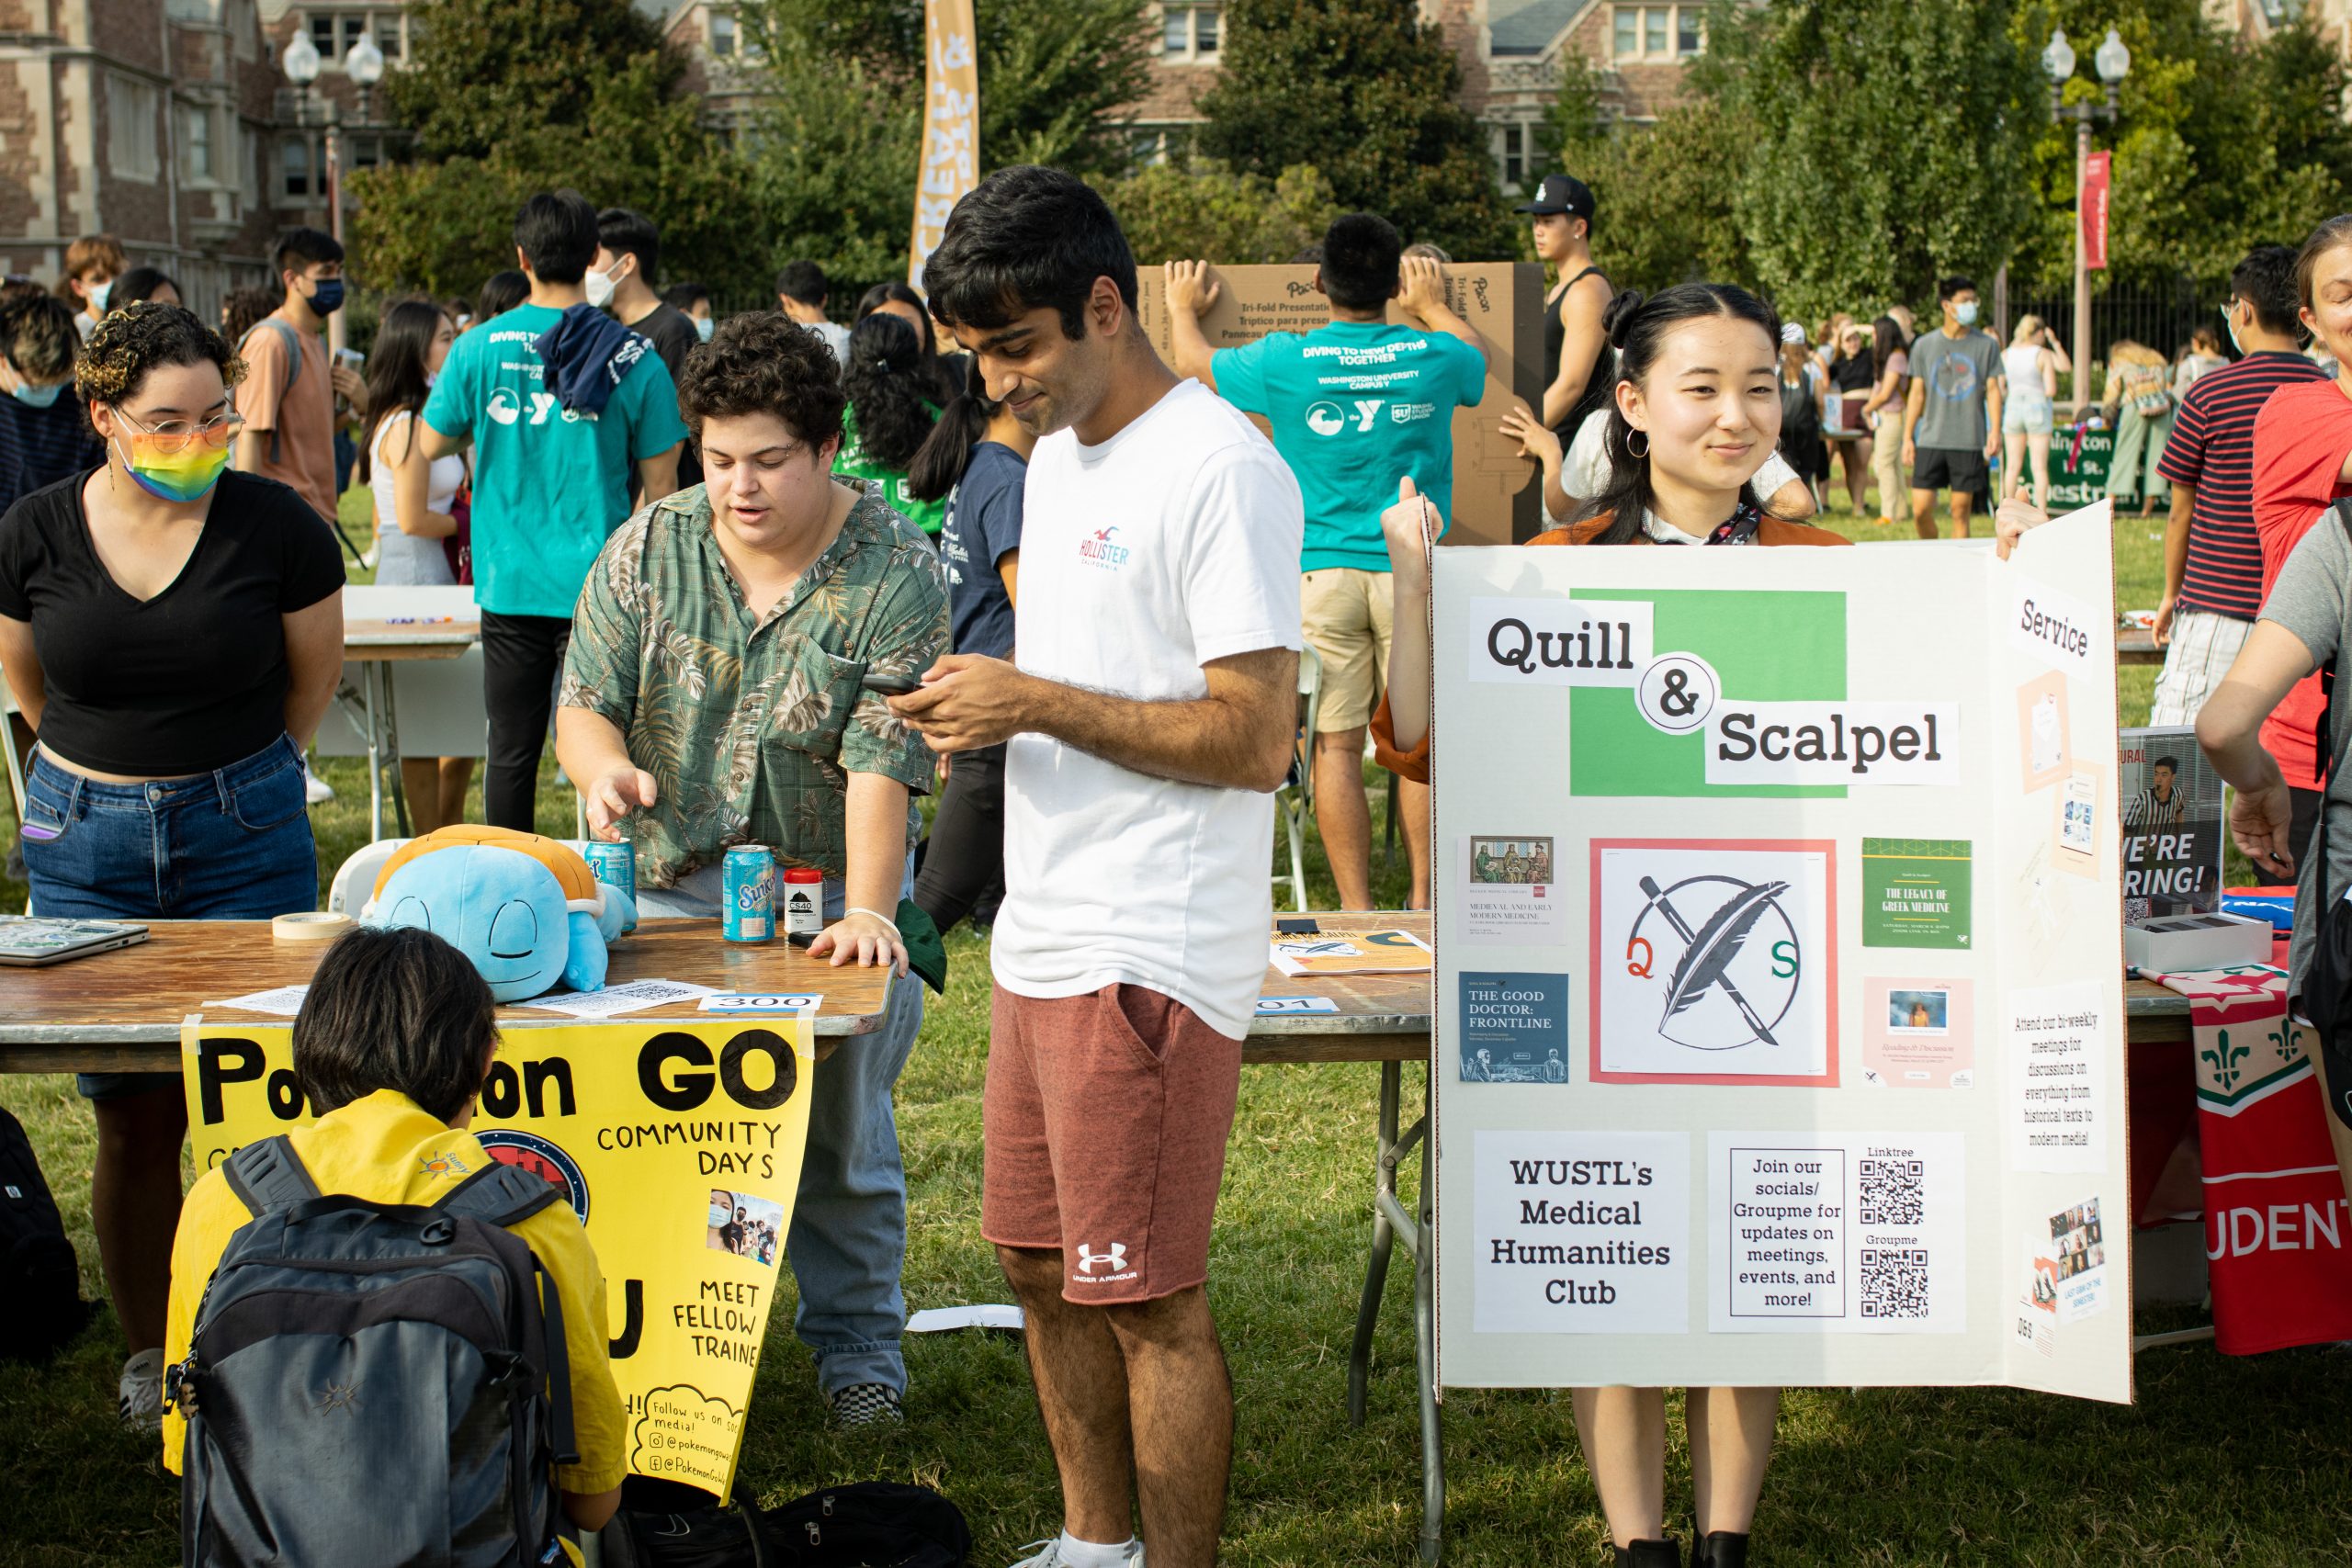 Groups of students stand near posters advertising various clubs.